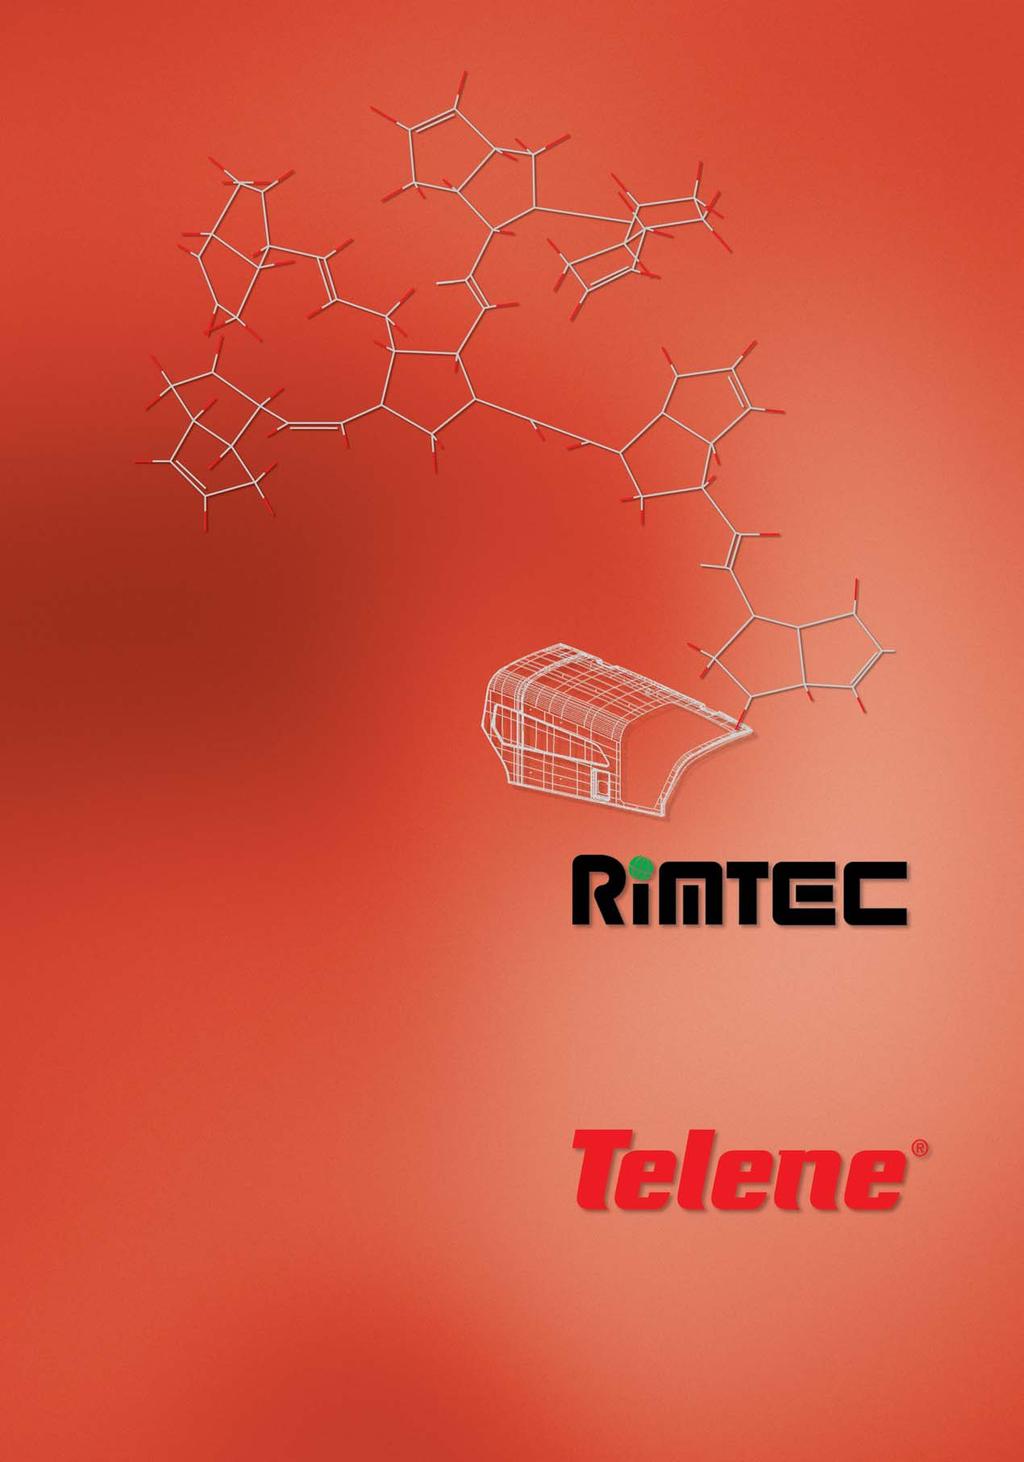 Telene is teaming up with a network of more than 20 established converters throughout Europe and beyond.